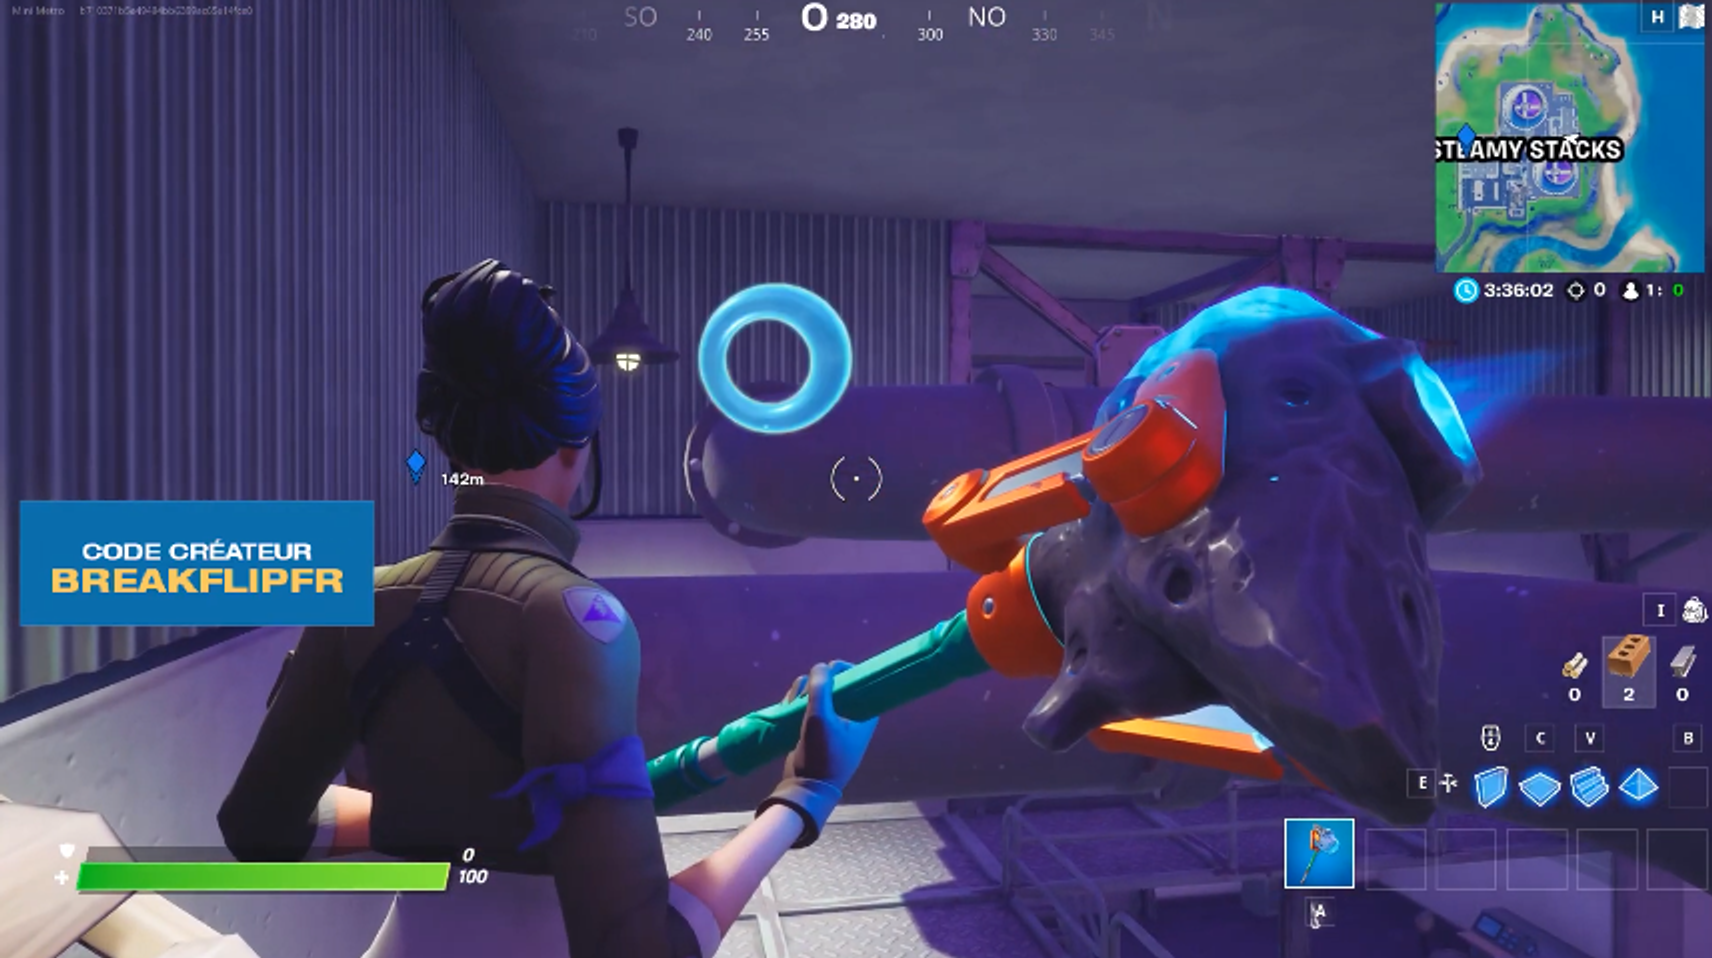 anneaux-collecter-steamy-stacks-fortnite-1